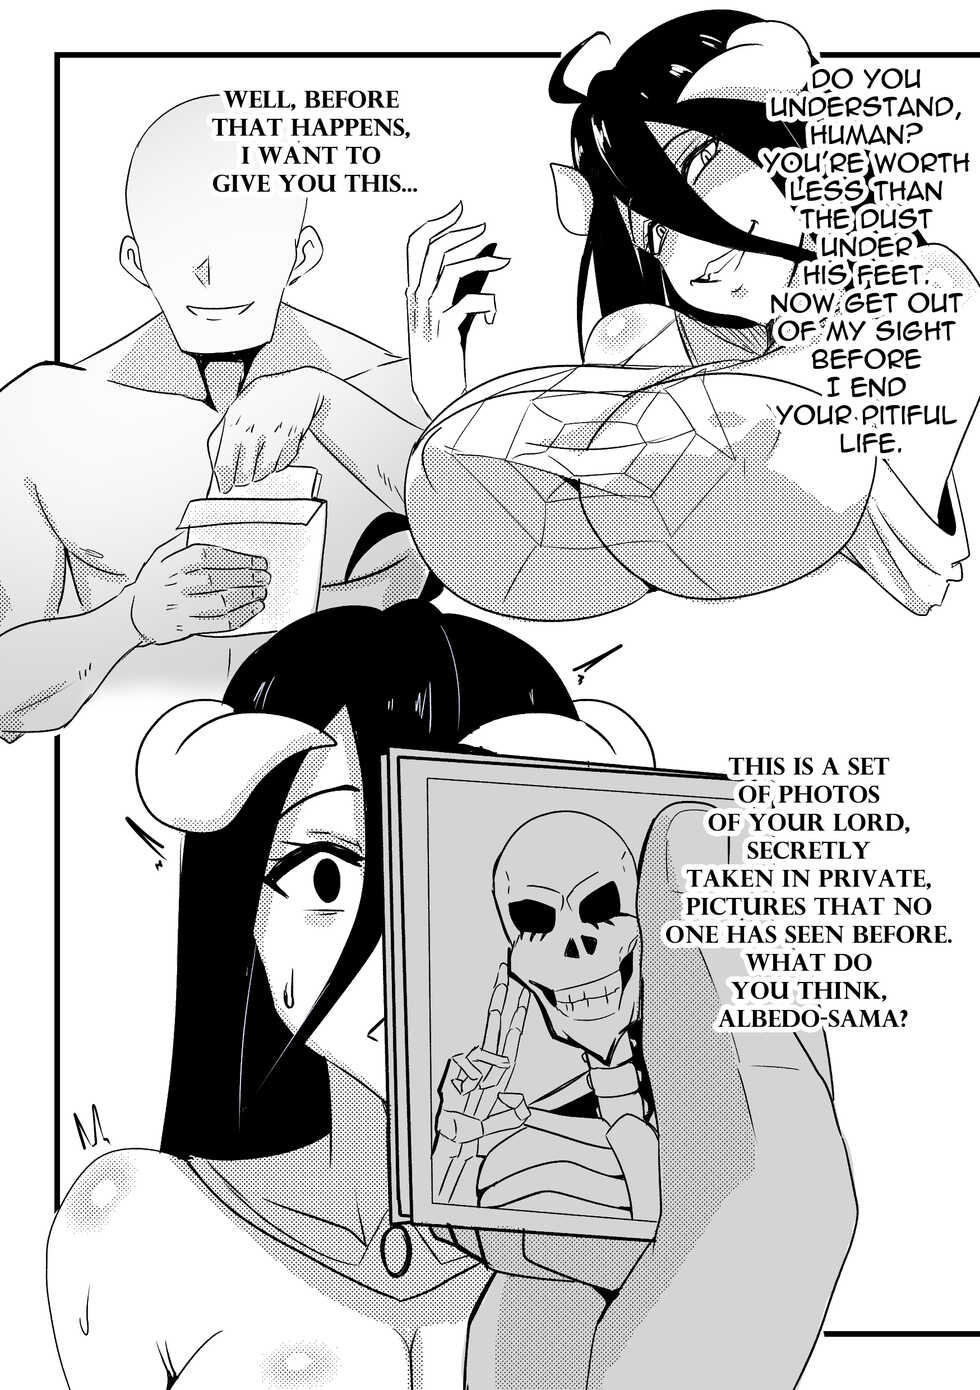 [Merkonig] Wenching 5 + Extras (Overlord) [English] [Decensored] - Page 3